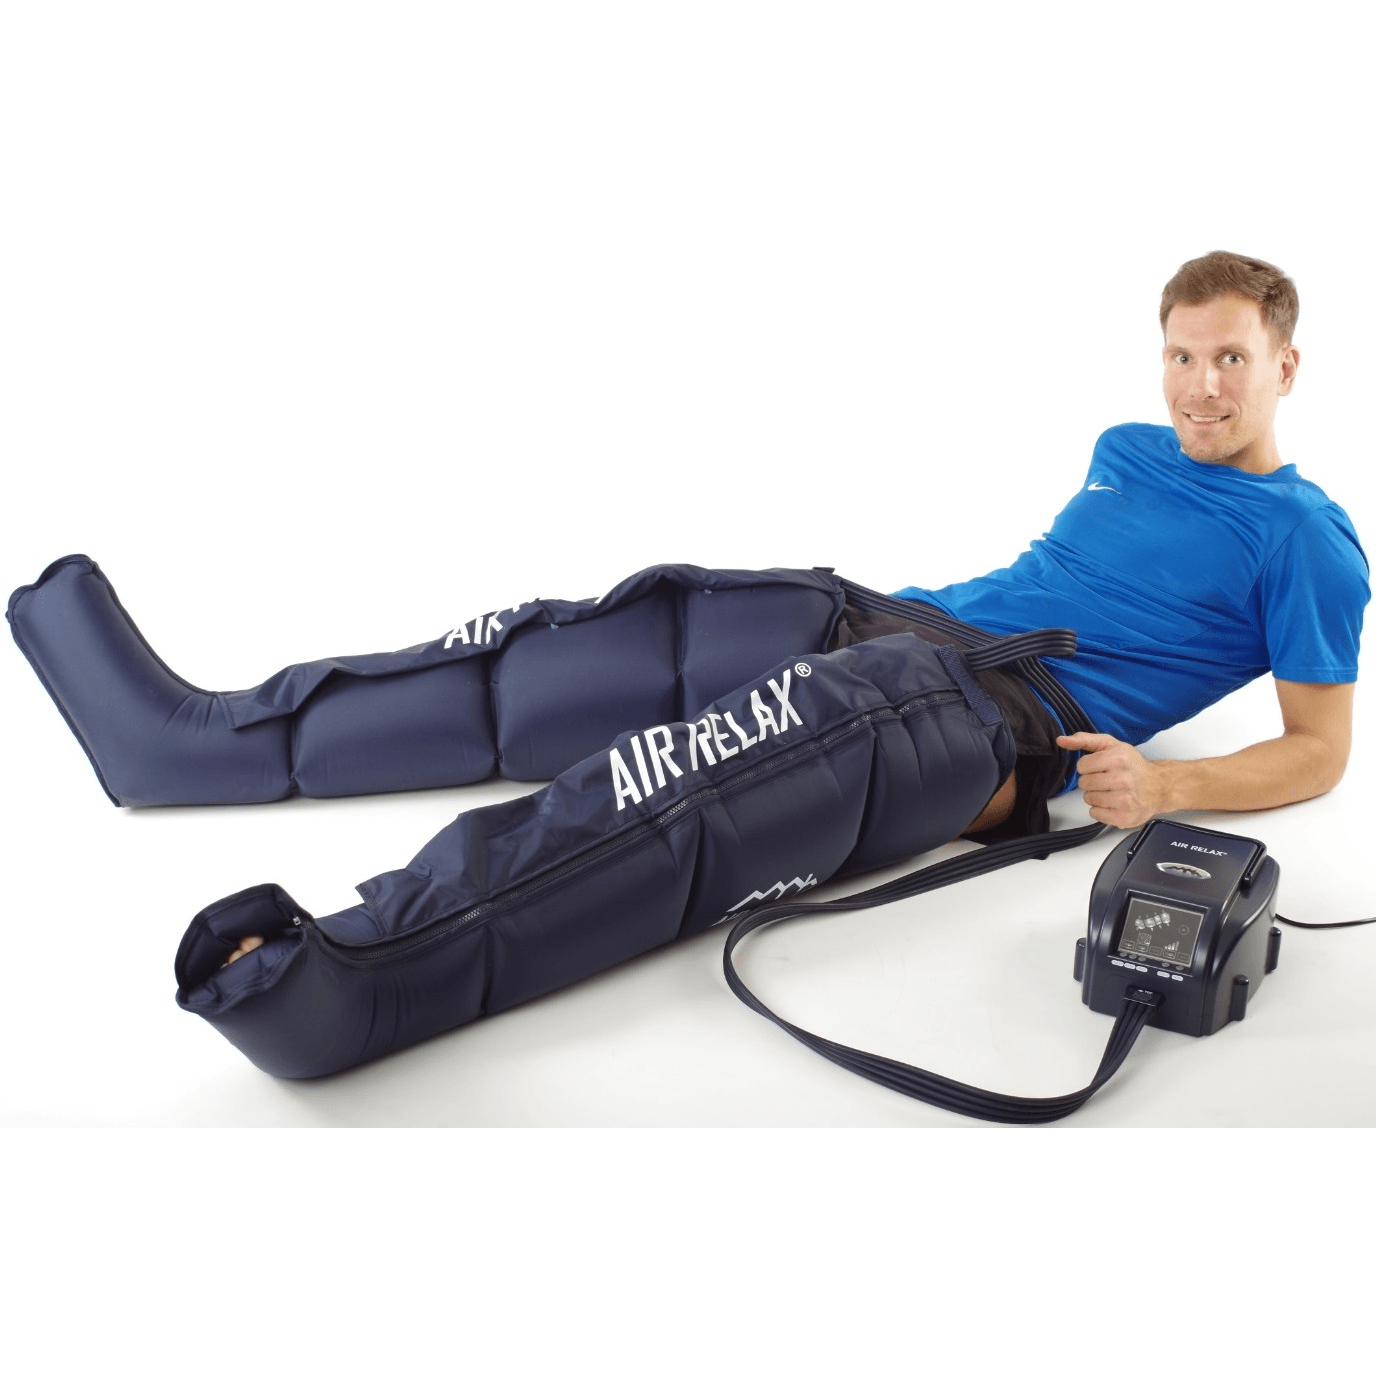 Air Relax Recovery Boots - Hoitola Kuulas